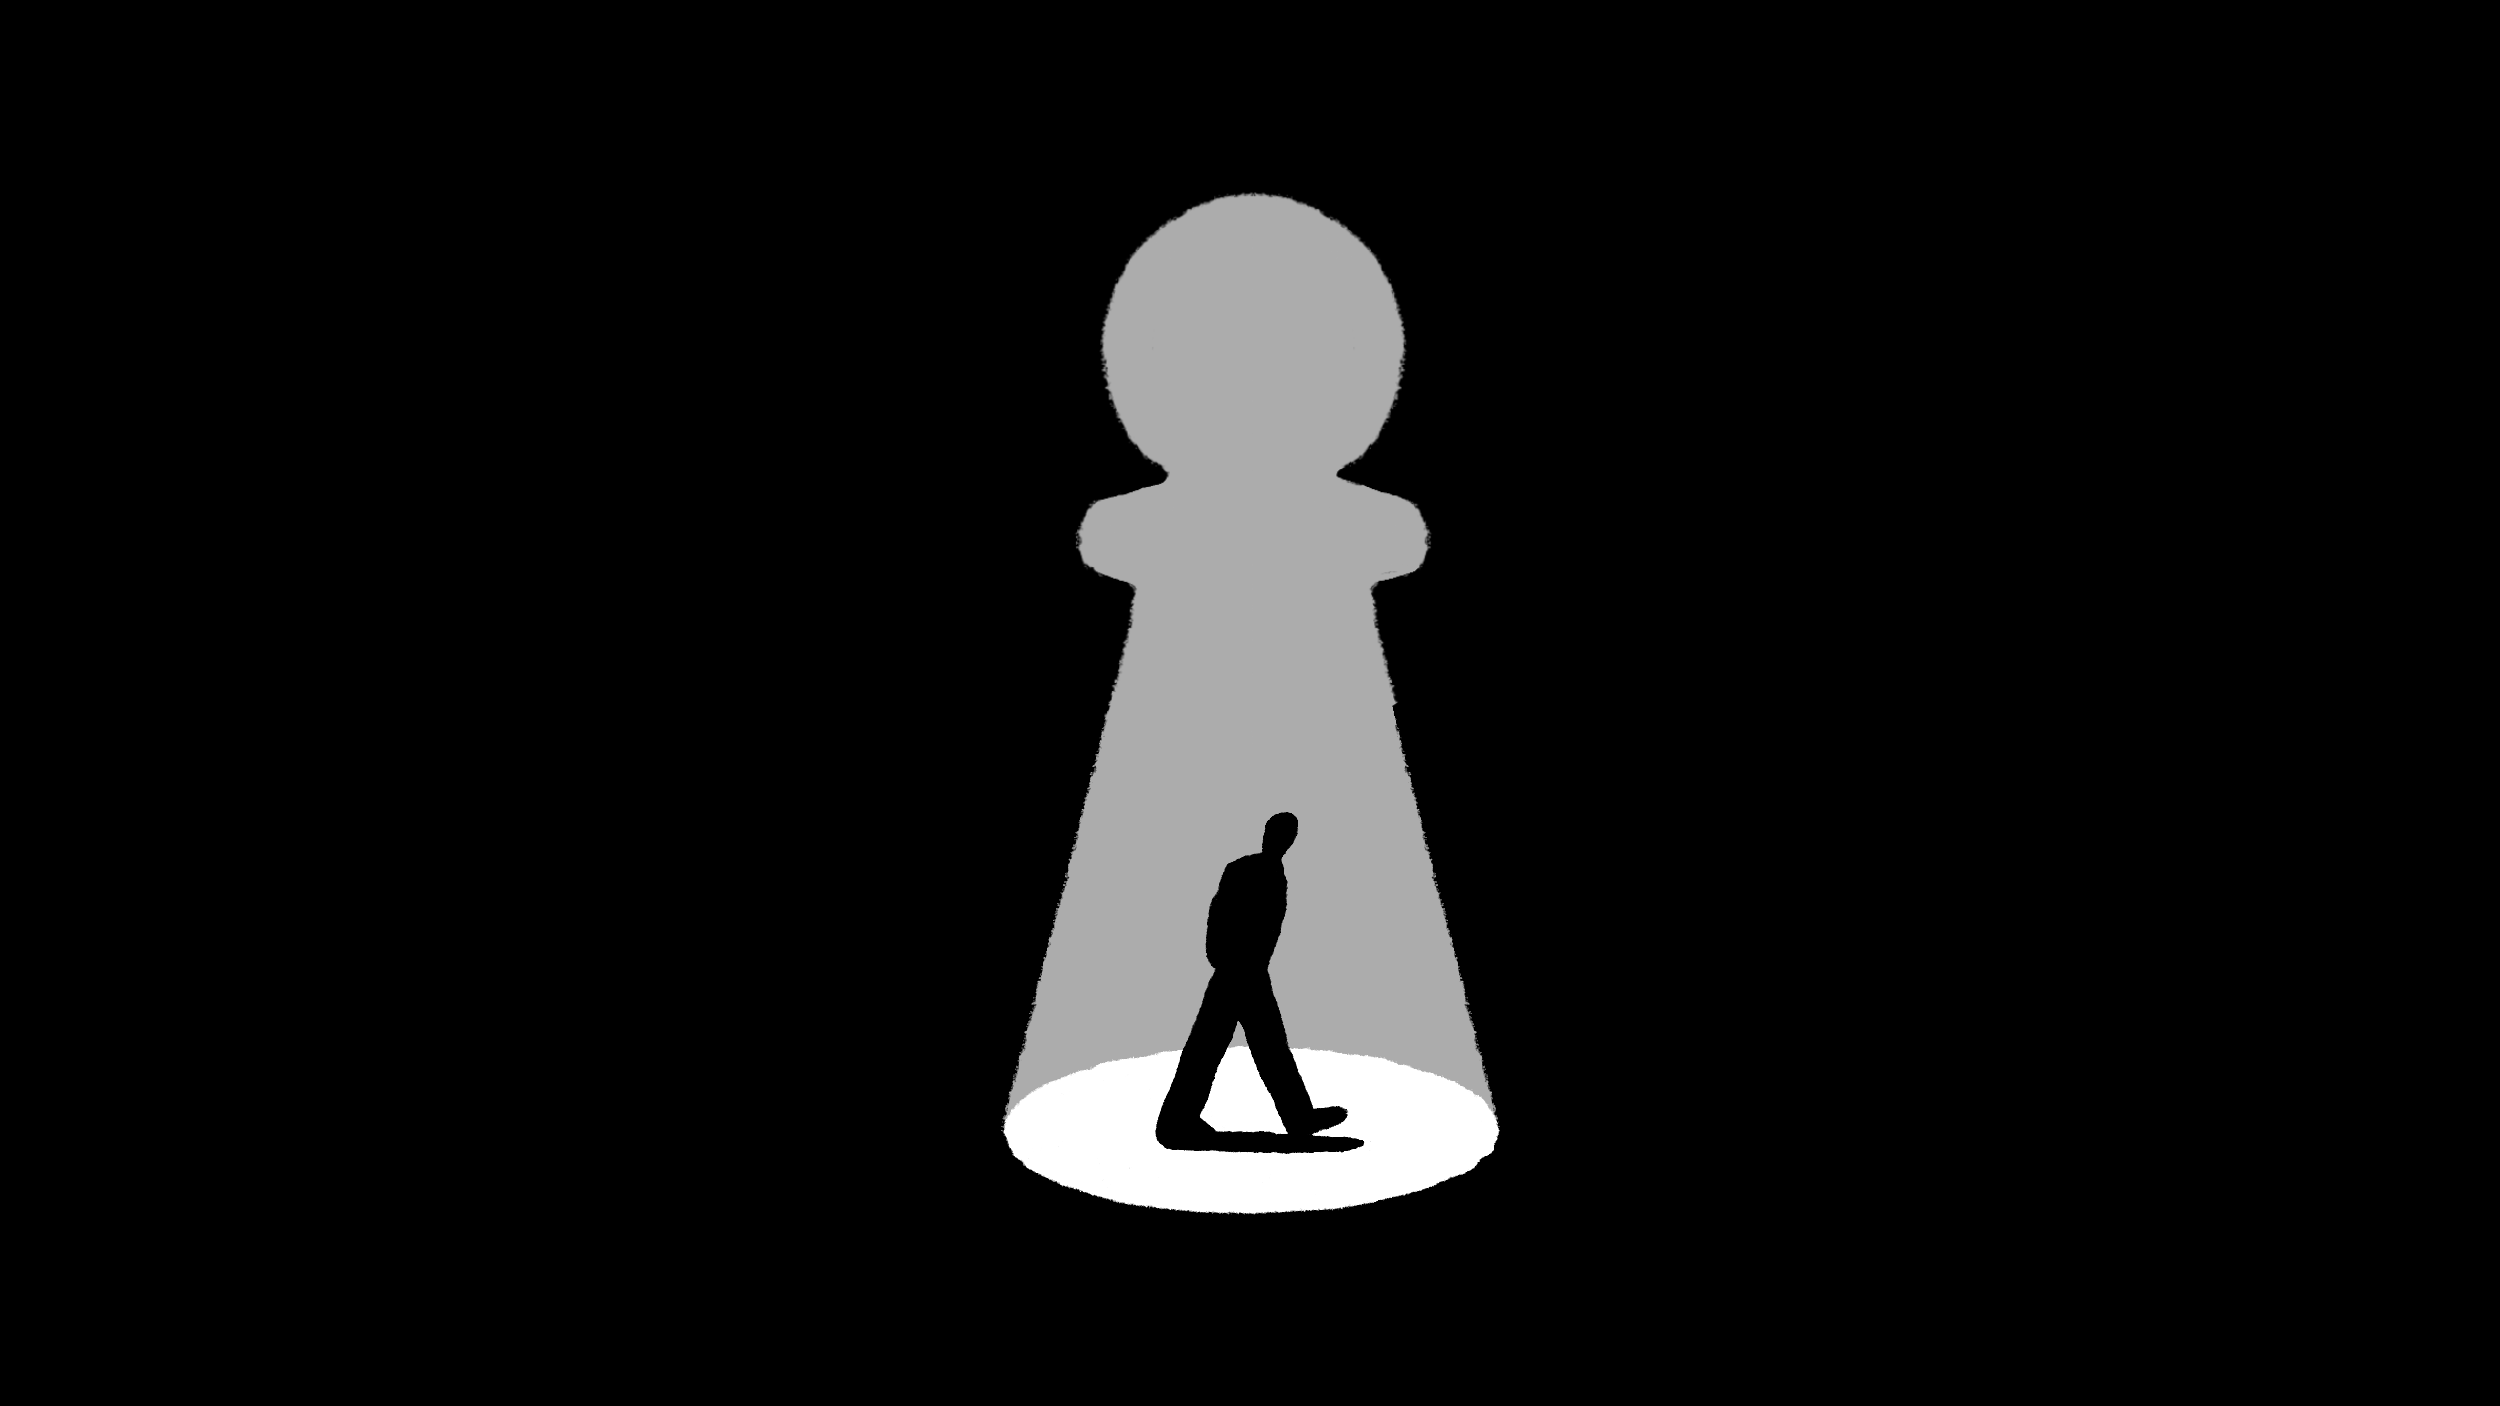 Silhouette of a man inside a chess piece